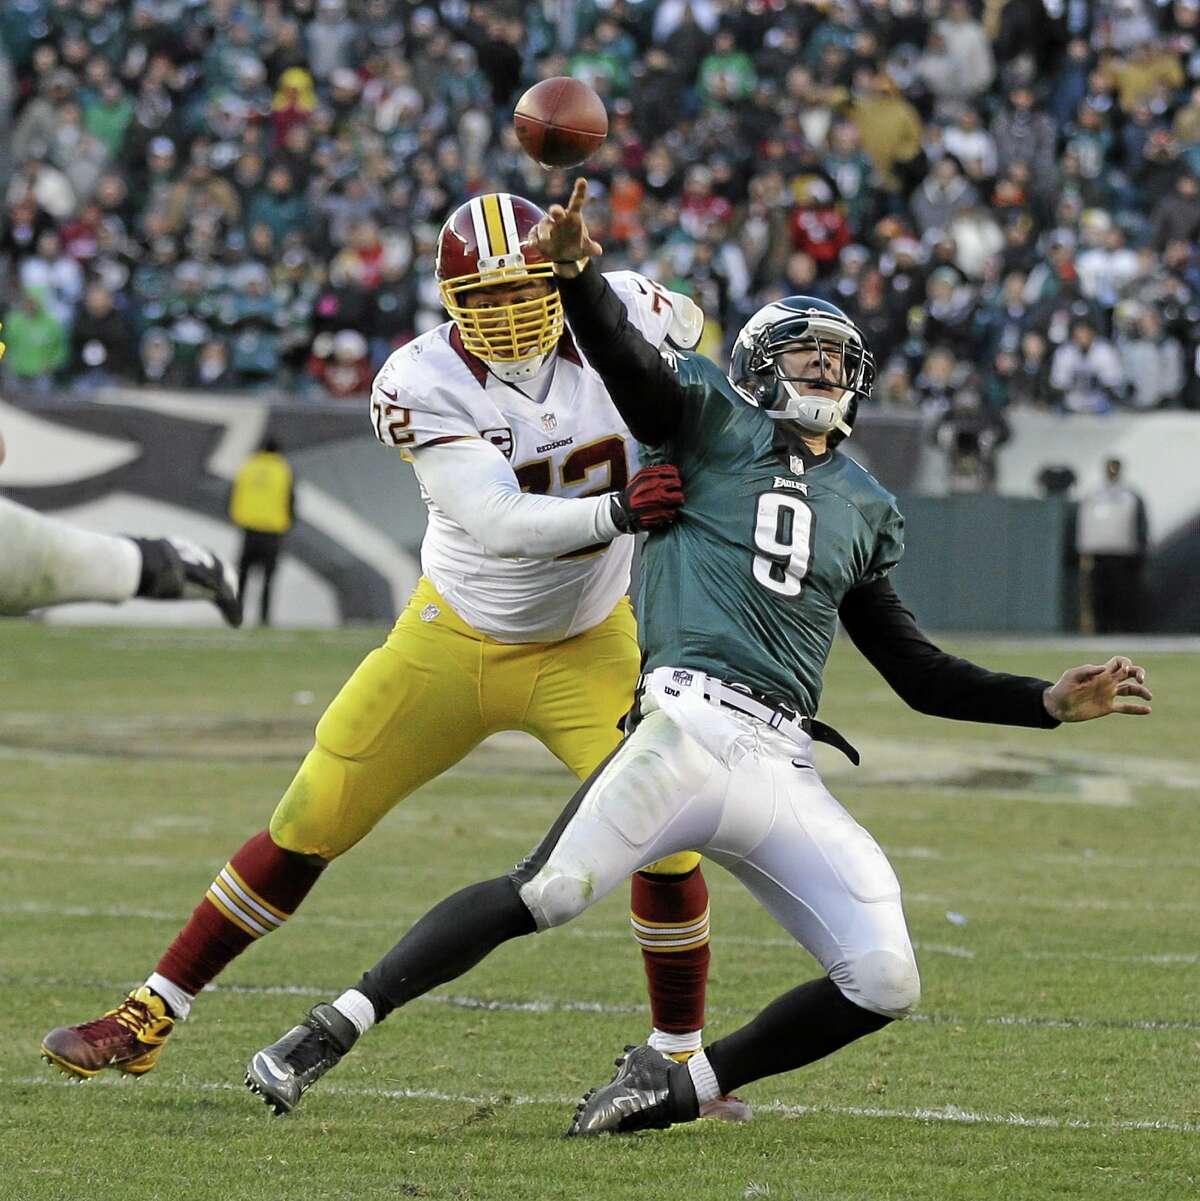 Philadelphia Eagles’ Nick Foles passes the ball as Washington Redskins’ Stephen Bowen brings him down during the final seconds of an NFL football game on Dec. 23, 2012, in Philadelphia. Foles was called for intentional grounding on the game-ending play. Washington won 27-20.